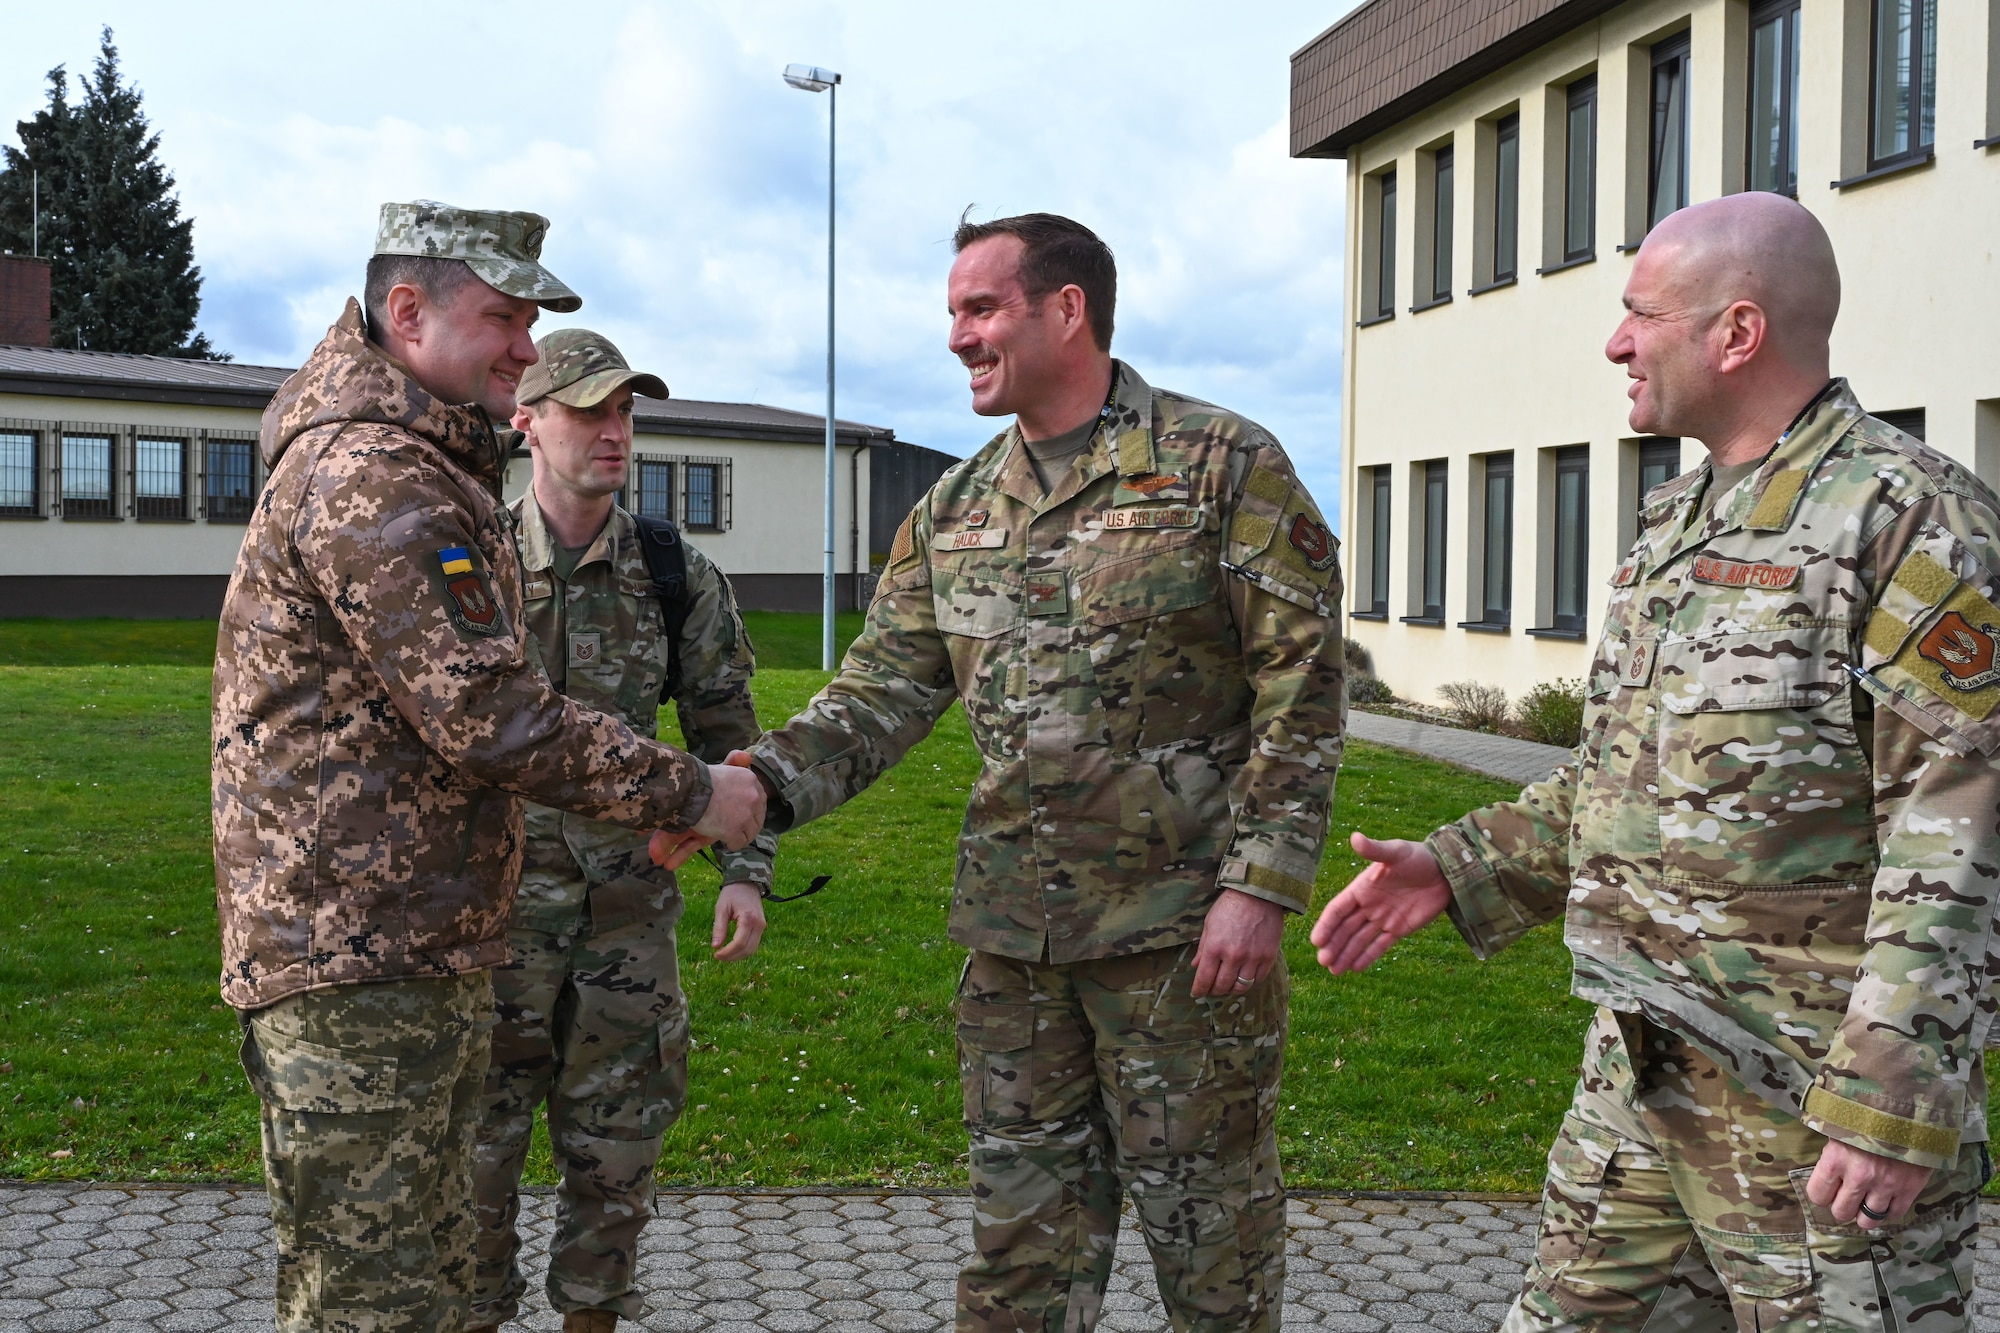 U.S. Air Force Col. Leslie Hauck, 52nd Fighter Wing Commander, right, greets Chief Master Sgt. of the Air Force of the Armed Forces of Ukraine Kostiantyn Stanislavchuk